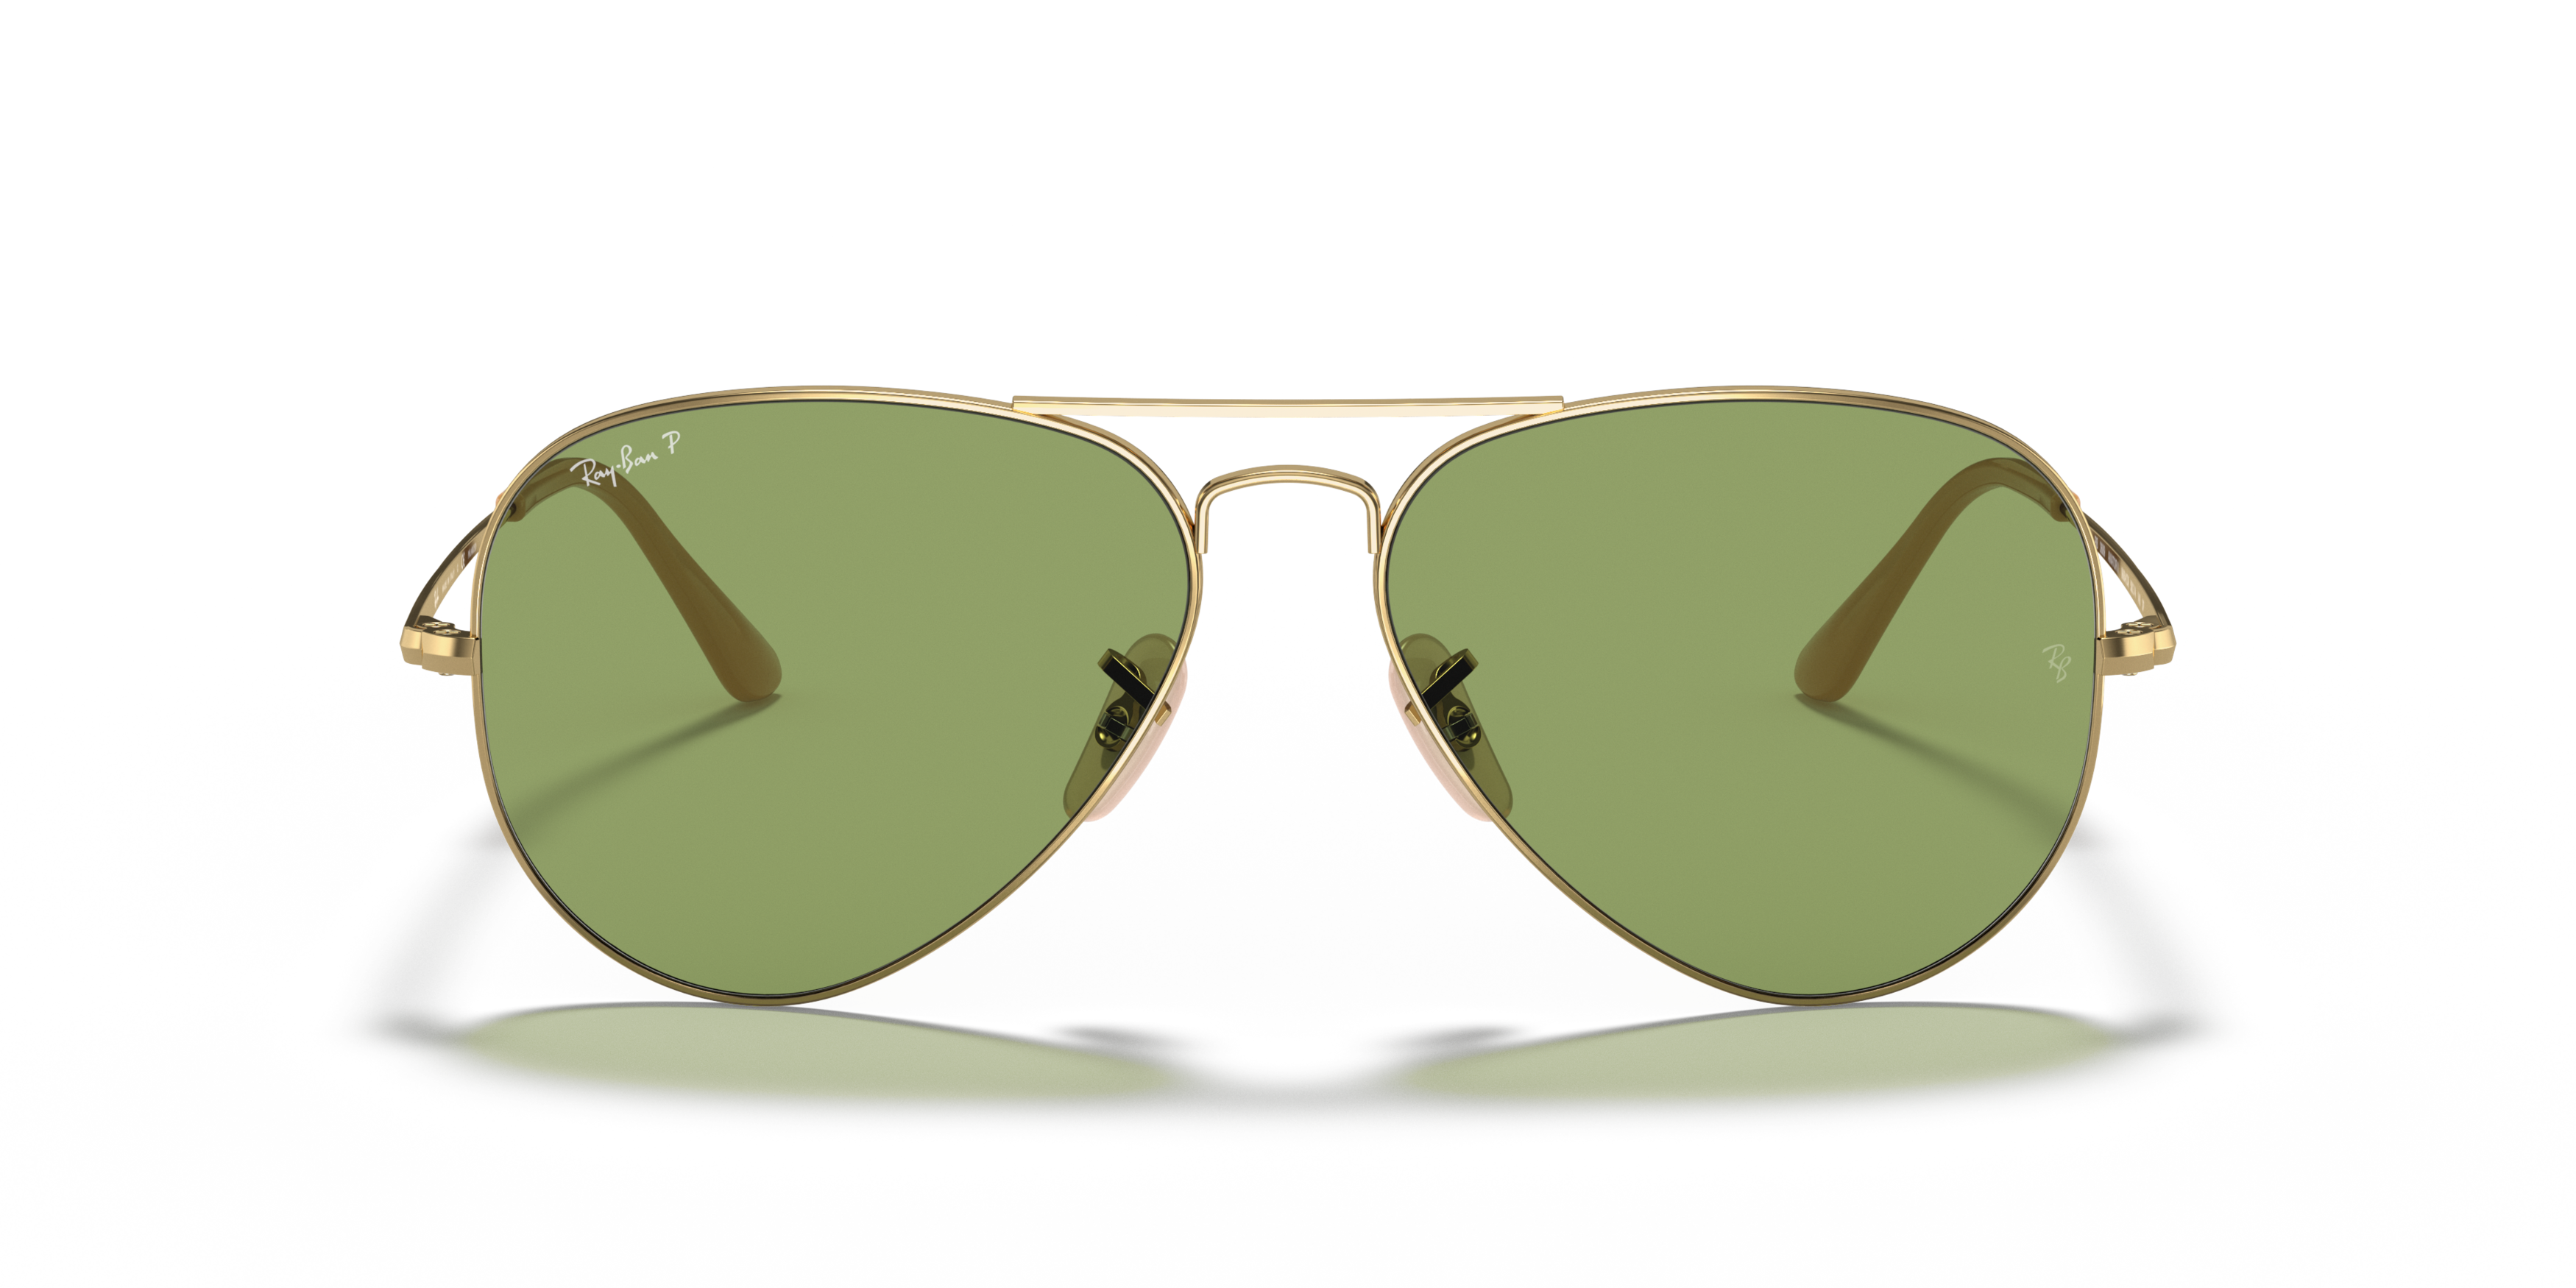 [products.image.front] Ray-Ban Aviator Metal II RB3689 9064O9